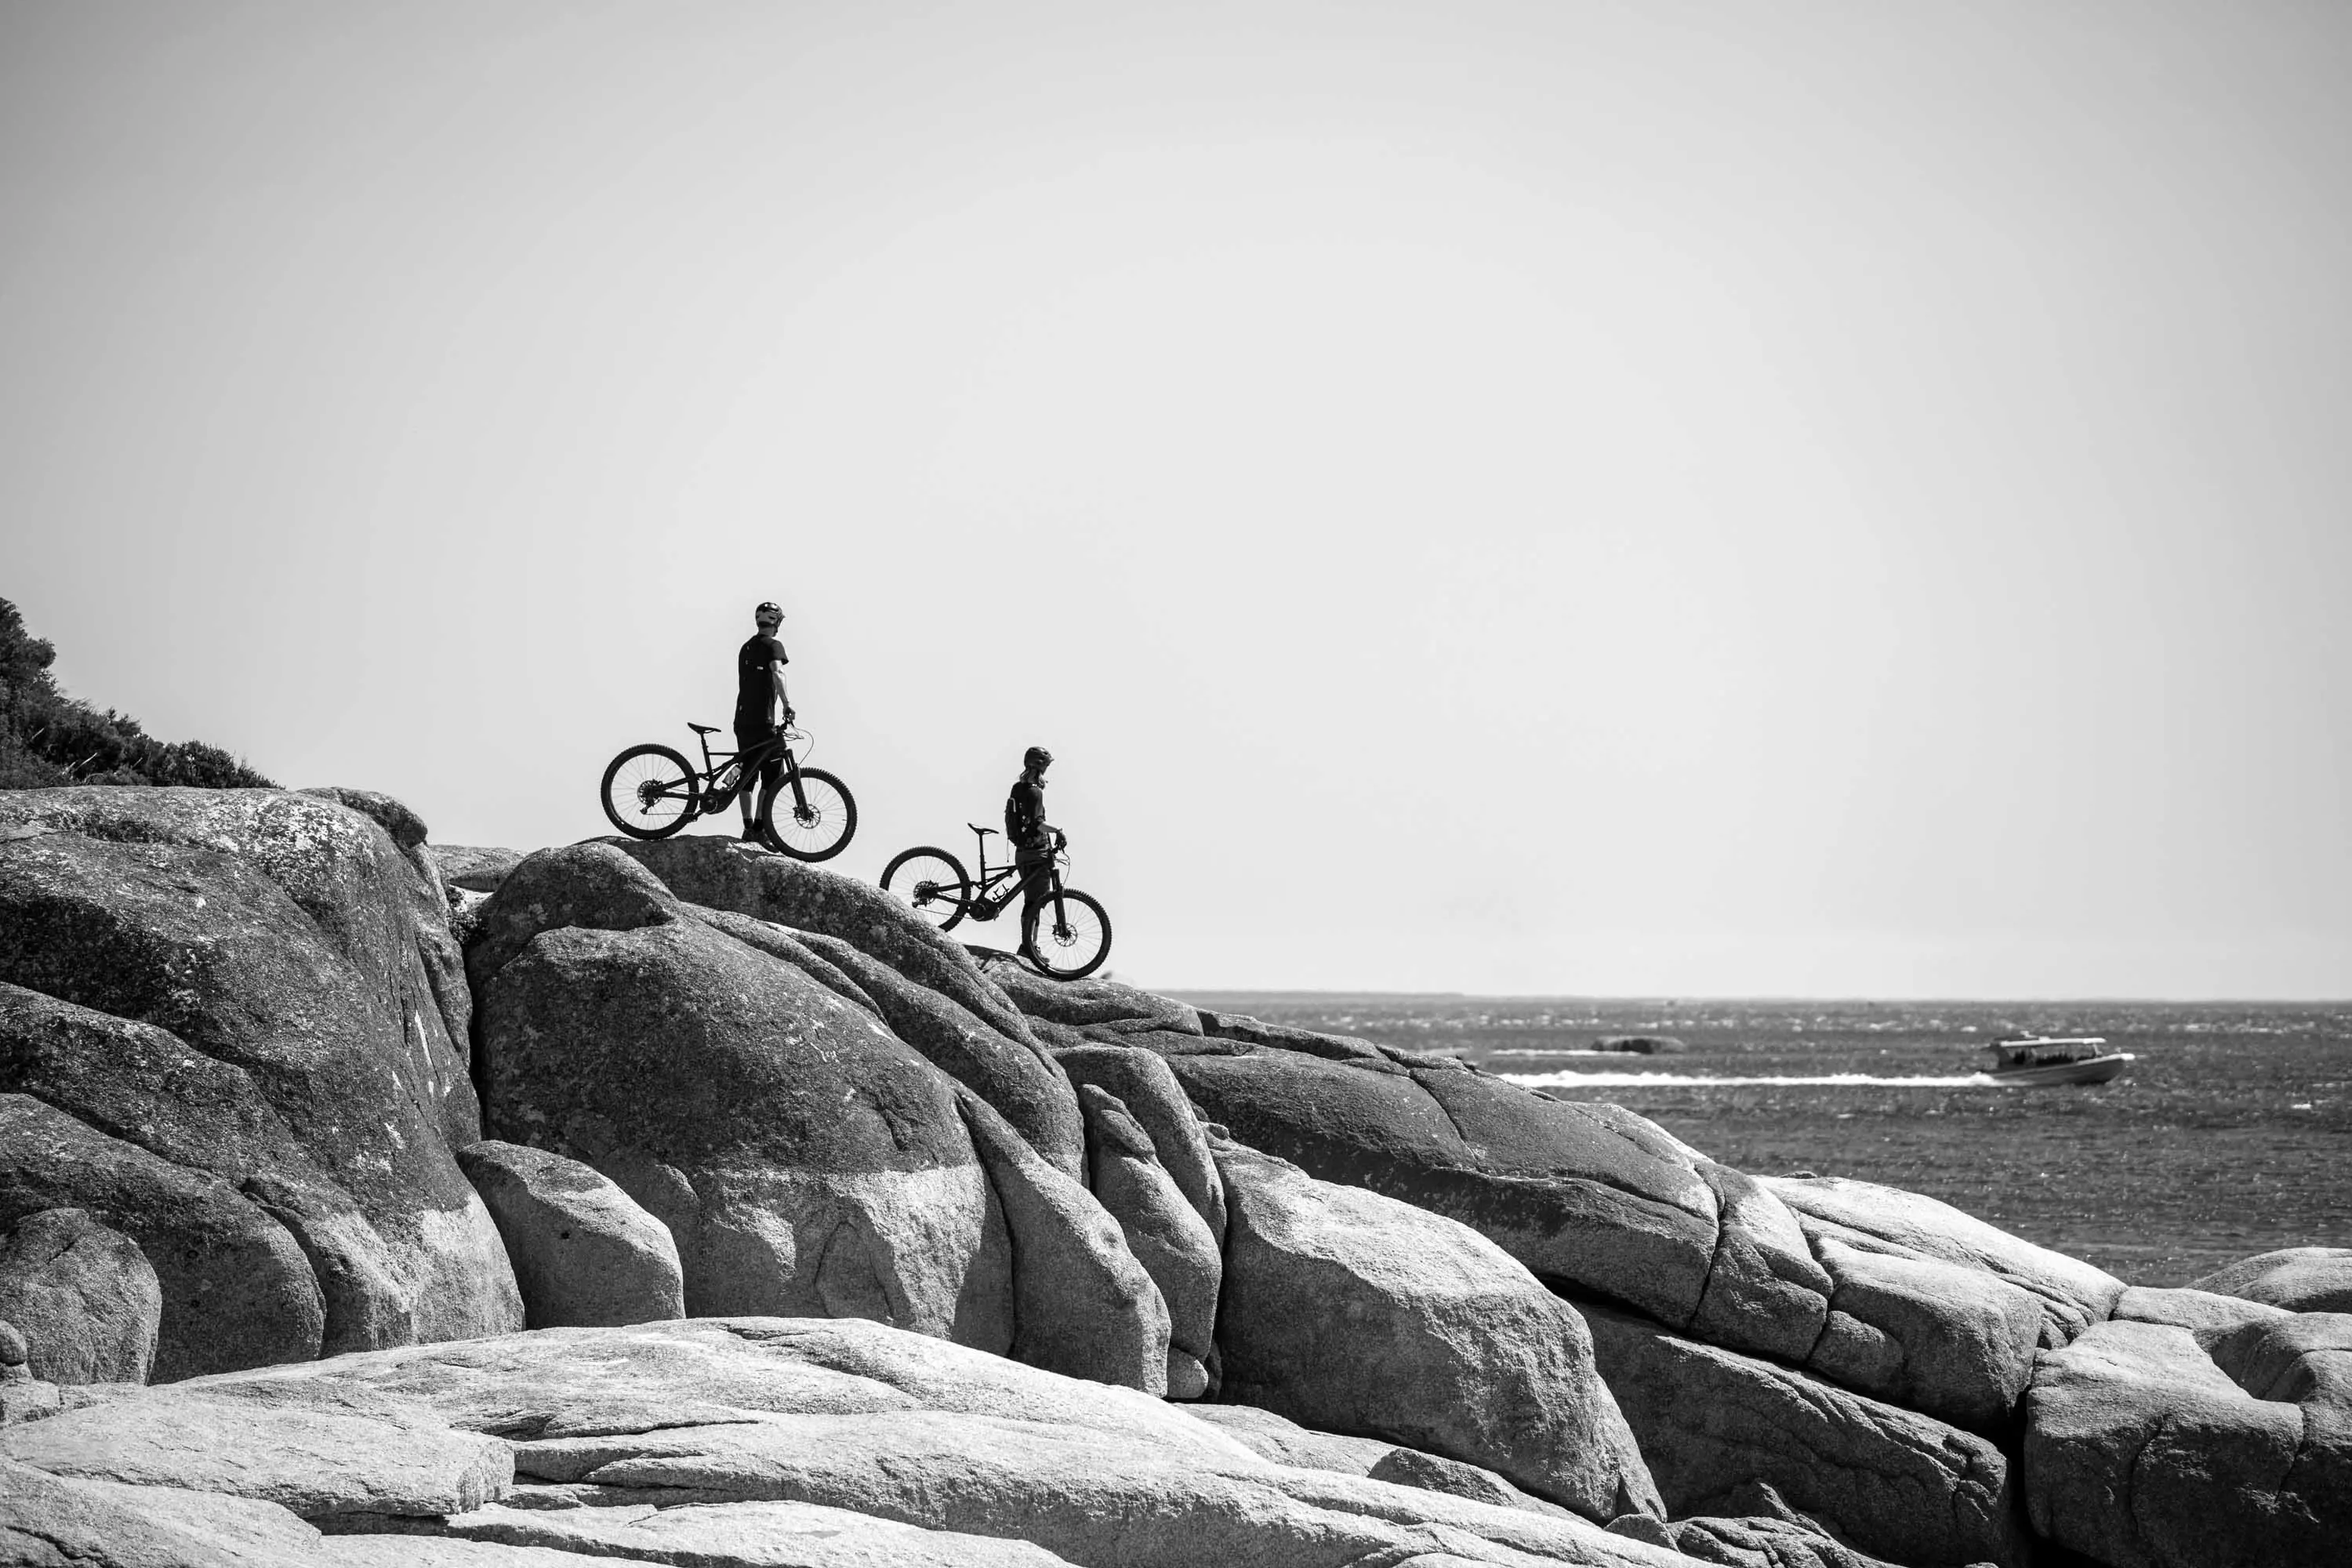 Two mountain bike riders stop on the top of a large, flat rock at the shore, looking out to the ocean.